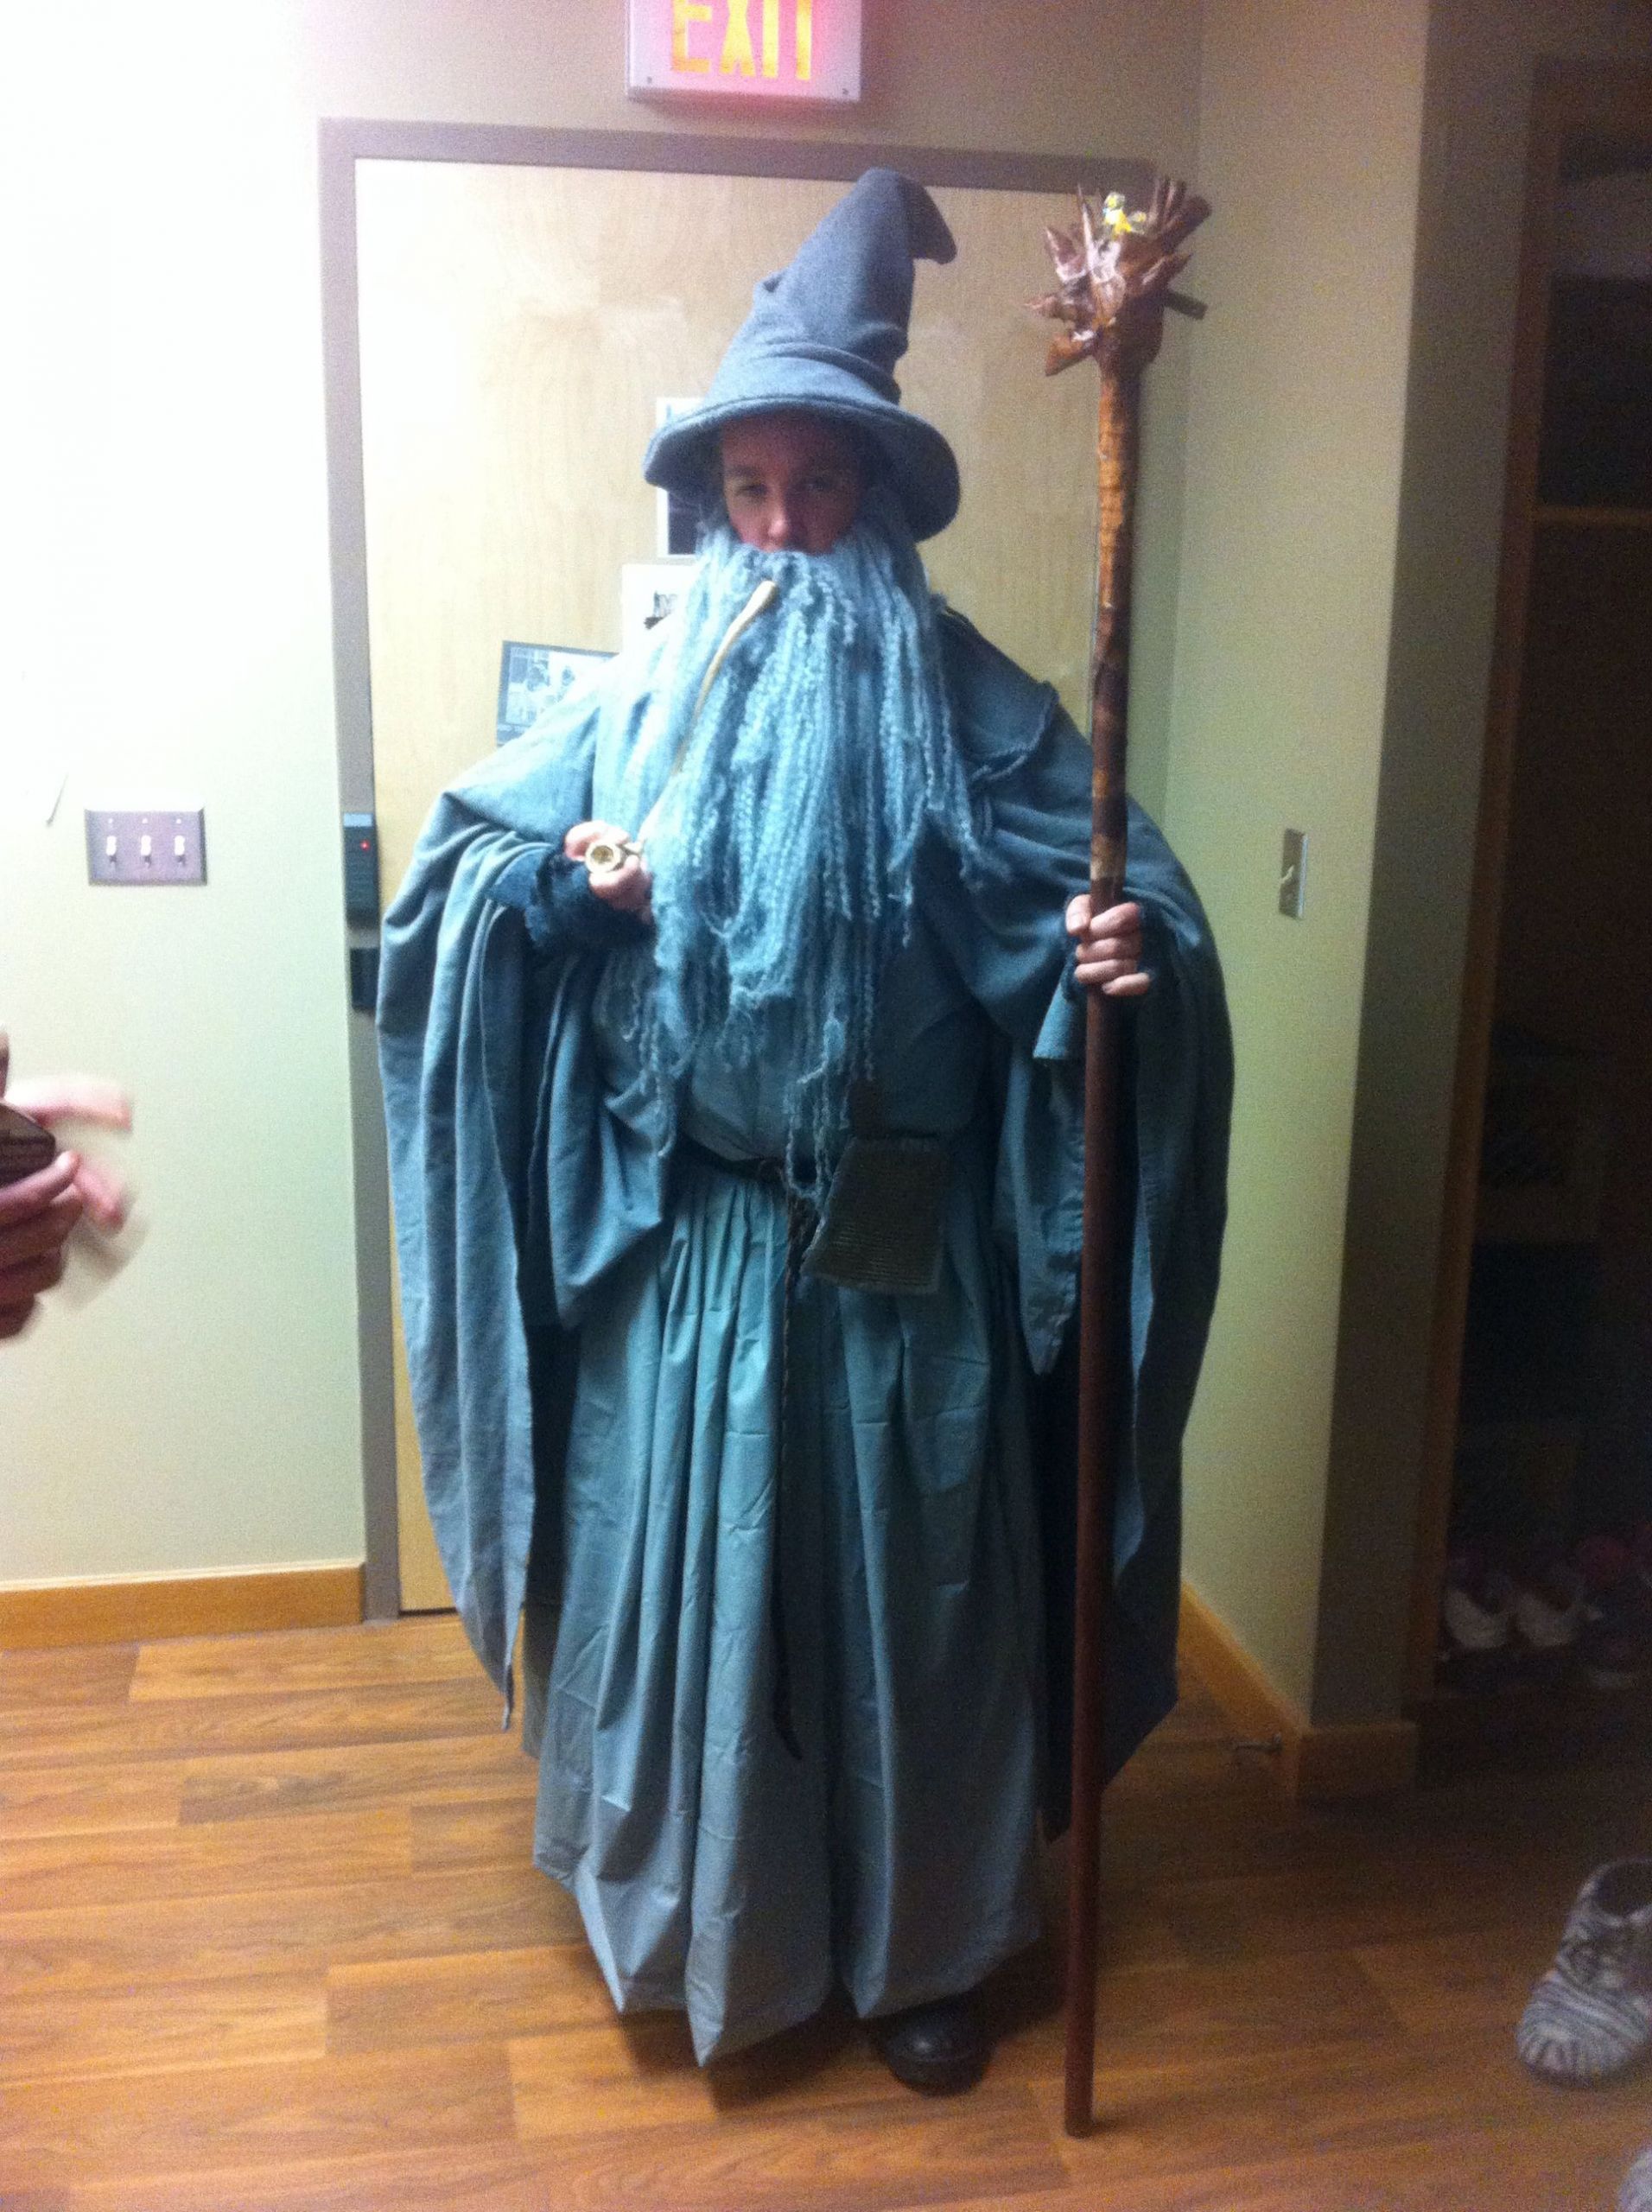 The Best Ideas for Gandalf Costume Diy - Home, Family, Style and Art Ideas